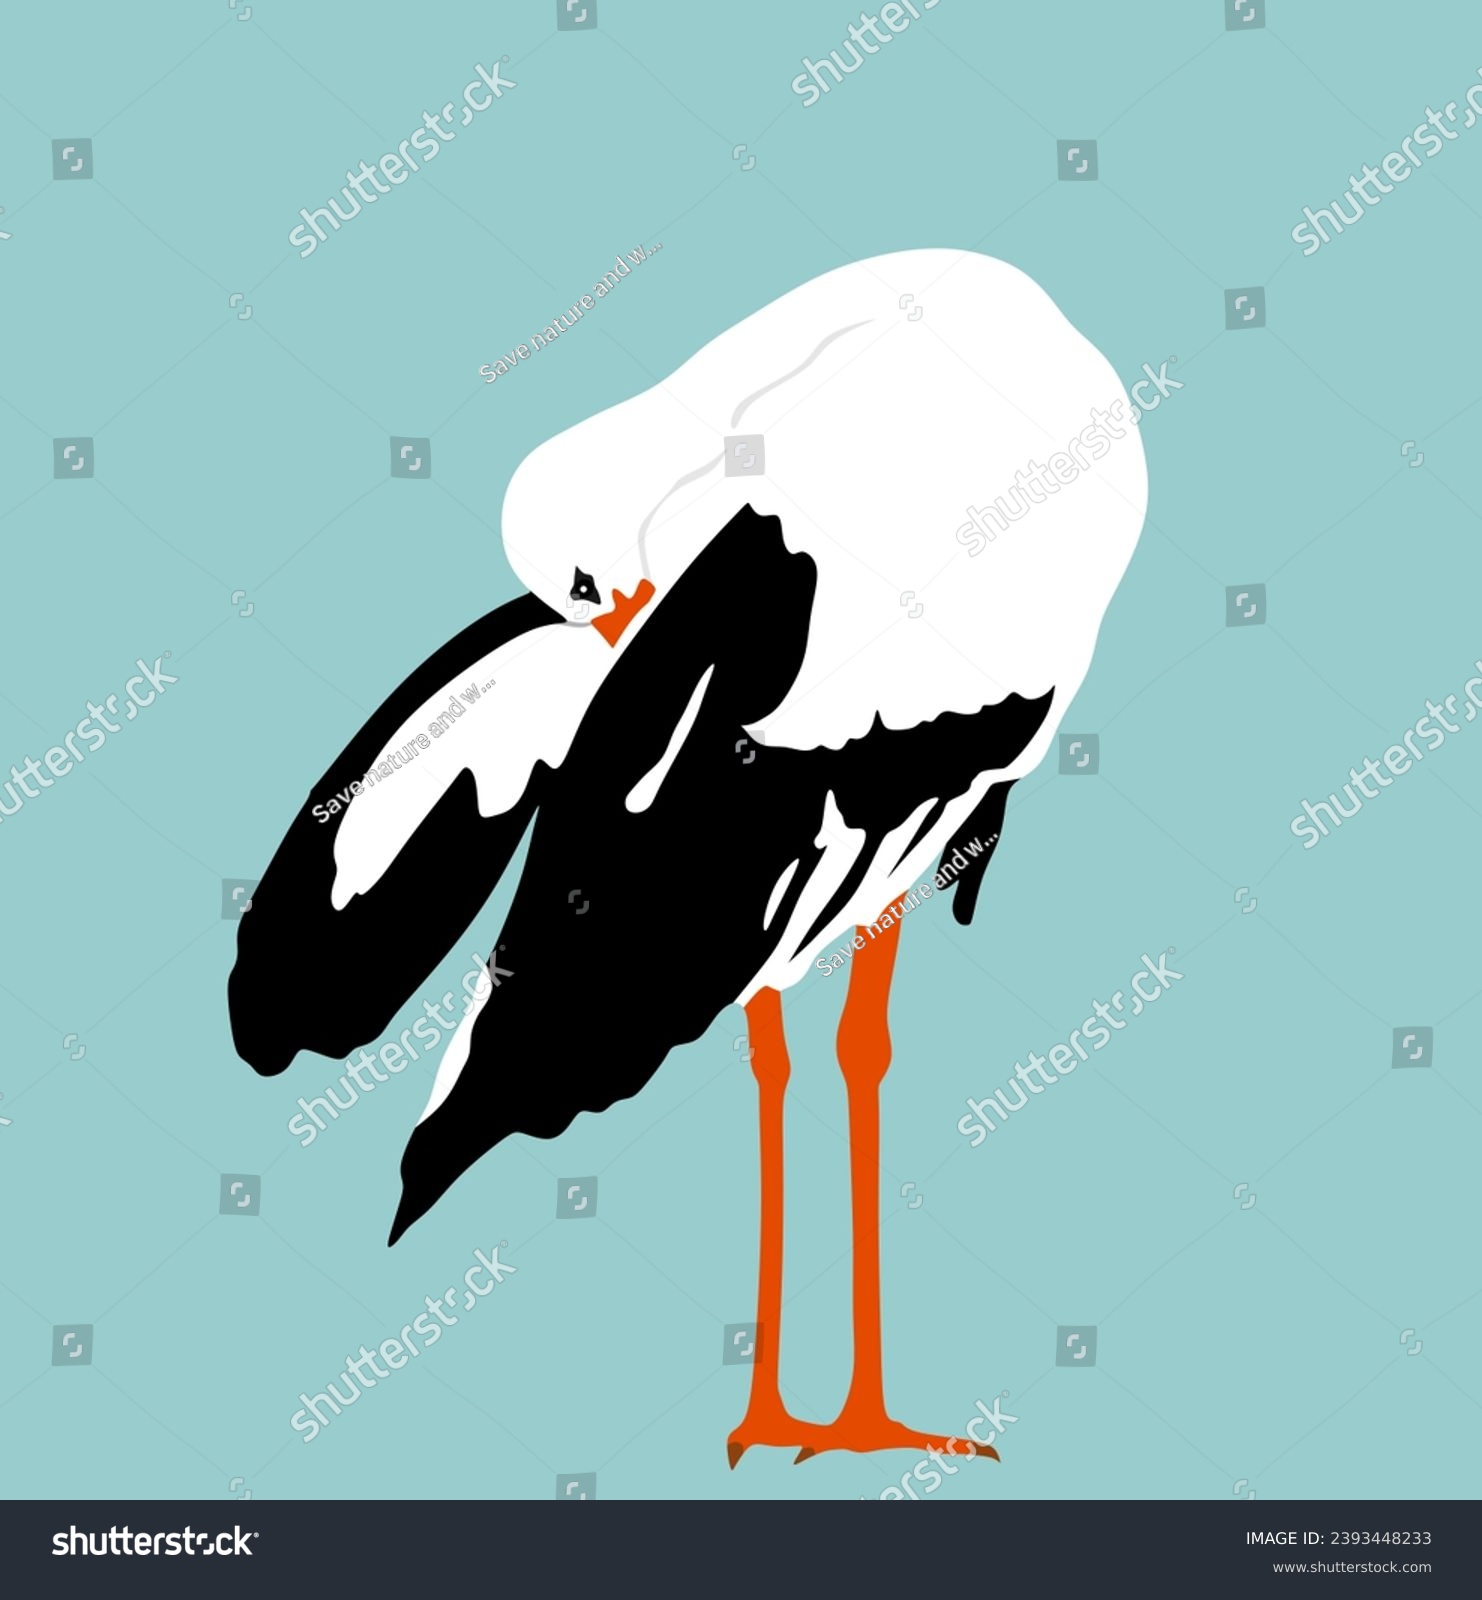 SVG of Washing body by beak elegant stork vector illustration isolated on blue background. Visitant migration bird stork cleaning feathers and wings. Water echo system. Animal bird hygiene. svg